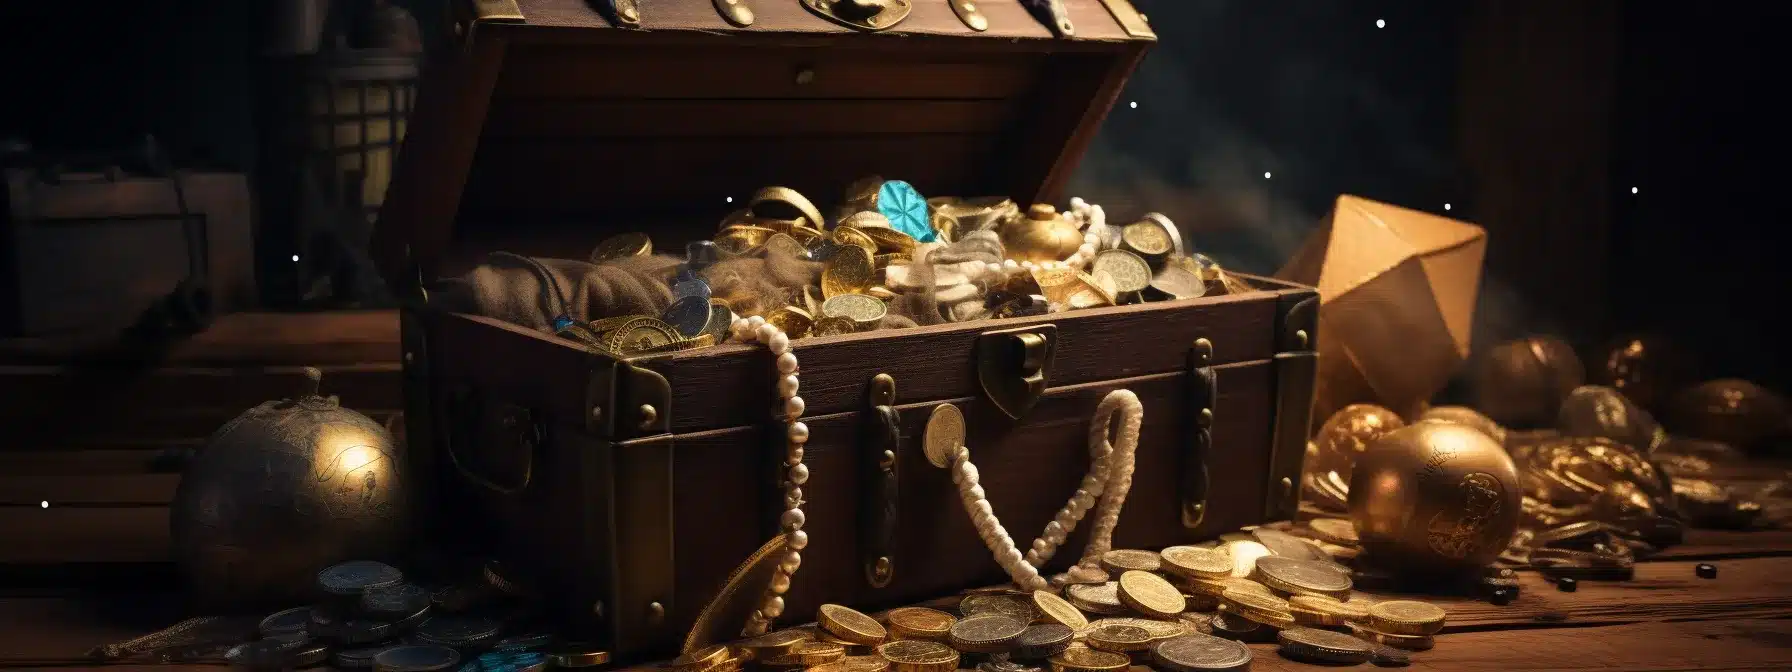 A Treasure Chest Filled With Artifacts Representing Different Elements Of A Marketing Strategy, Waiting To Be Discovered.